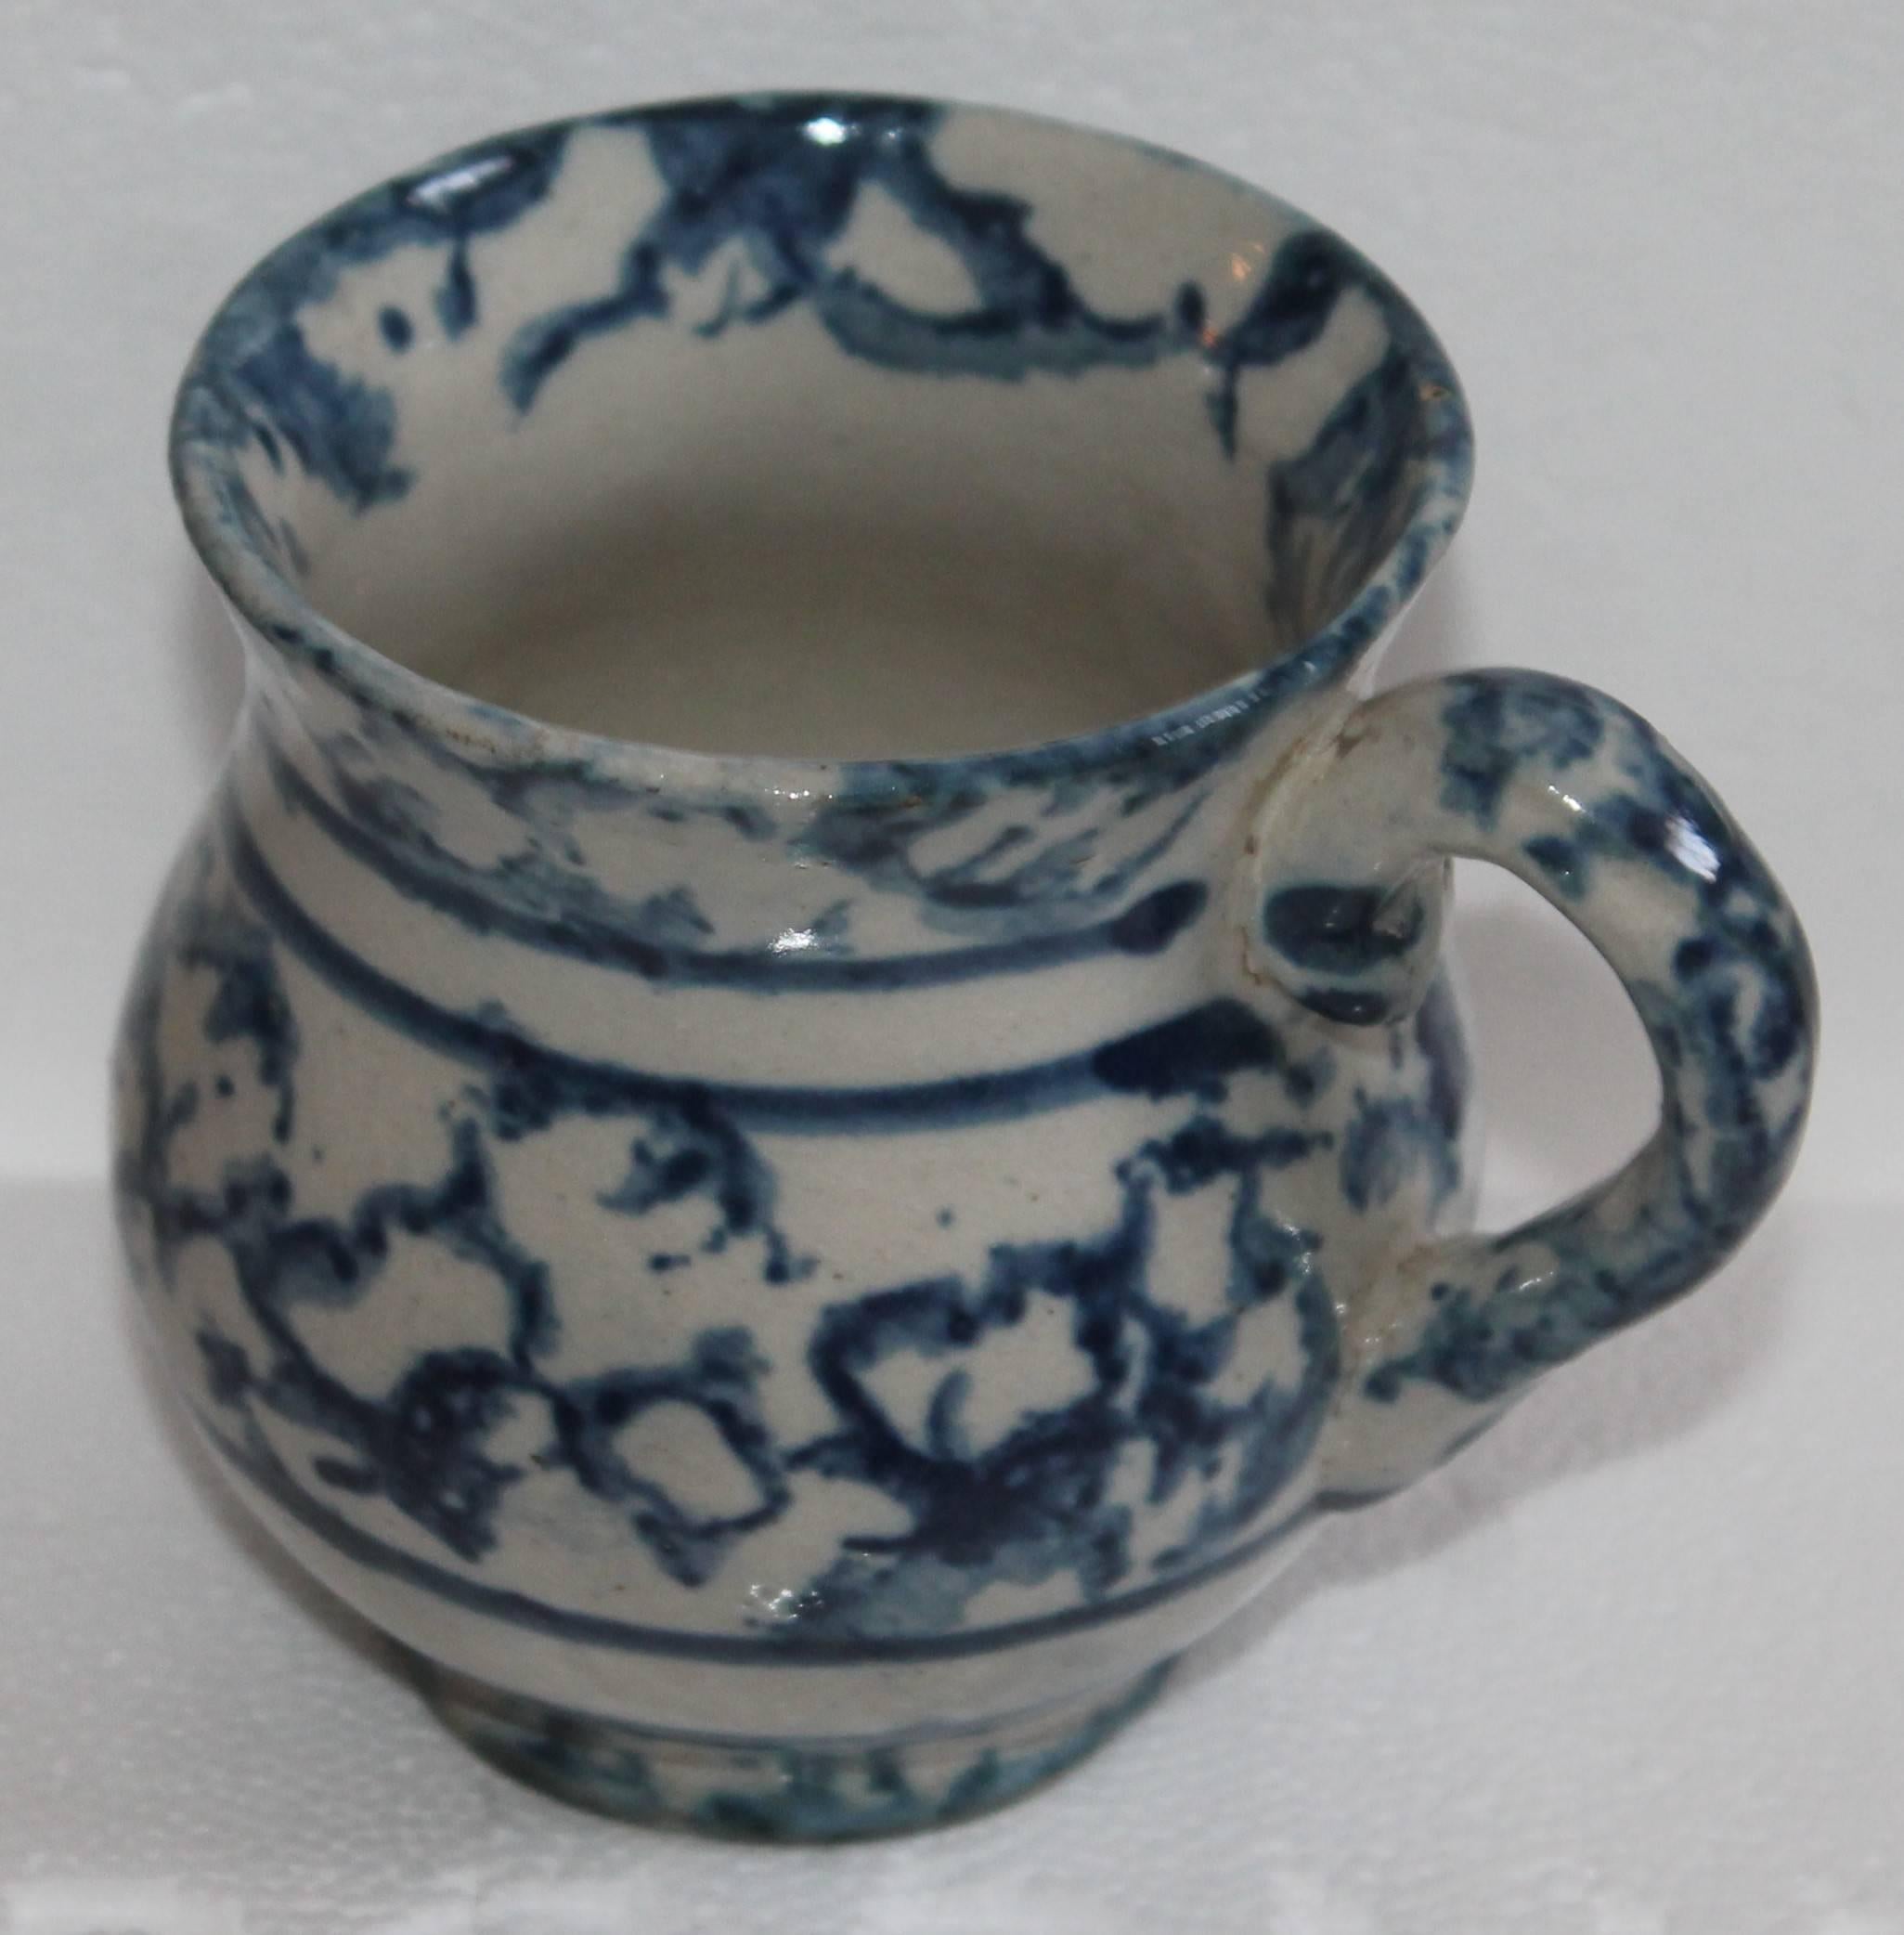 19th century sponge ware shaving mug. This is the piece that is so hard to find in the wash bowl set.